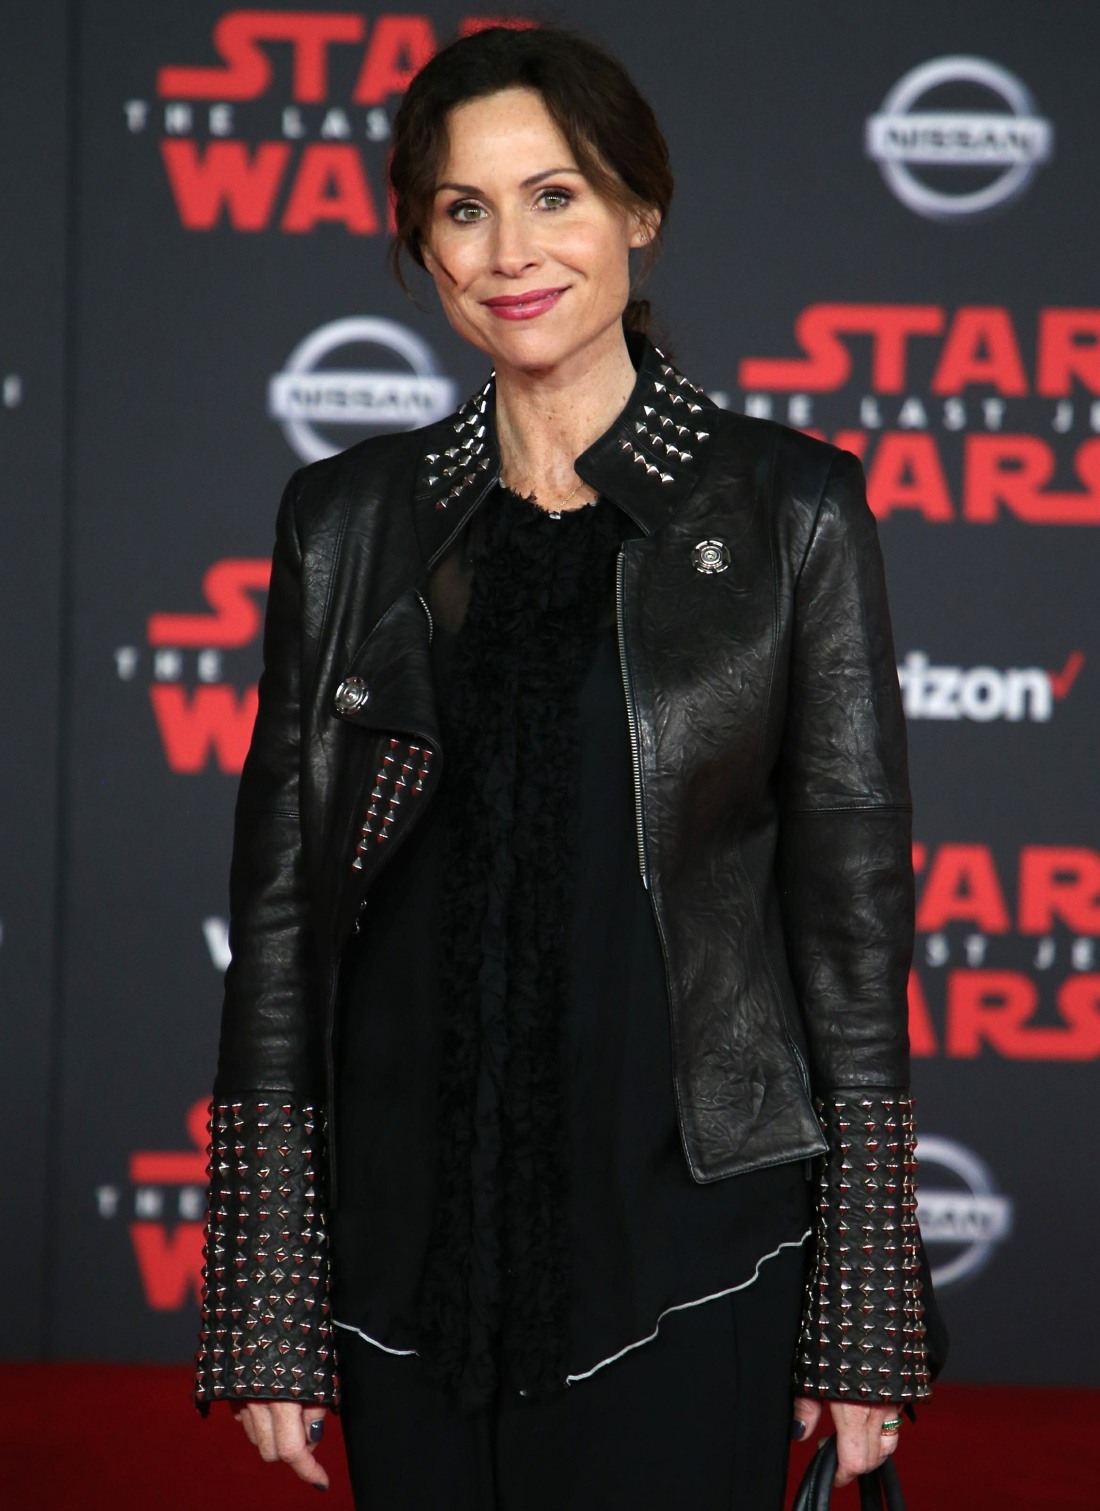 Minnie Driver poses at the world premiere of "Star Wars: The Last Jedi"